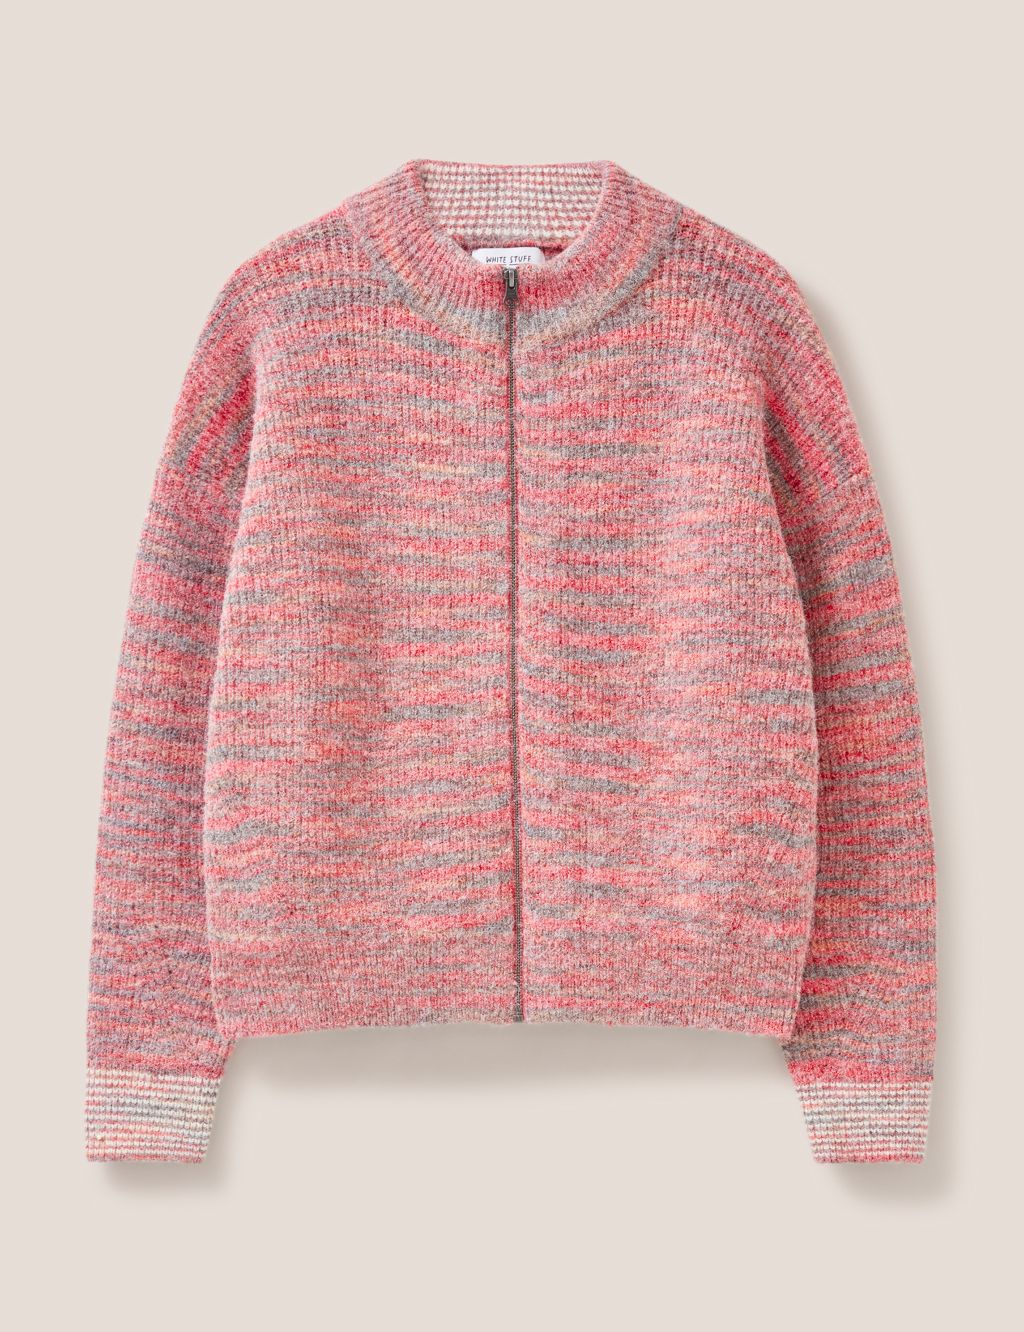 Ribbed Crew Neck Bomber Cardigan with Wool image 1